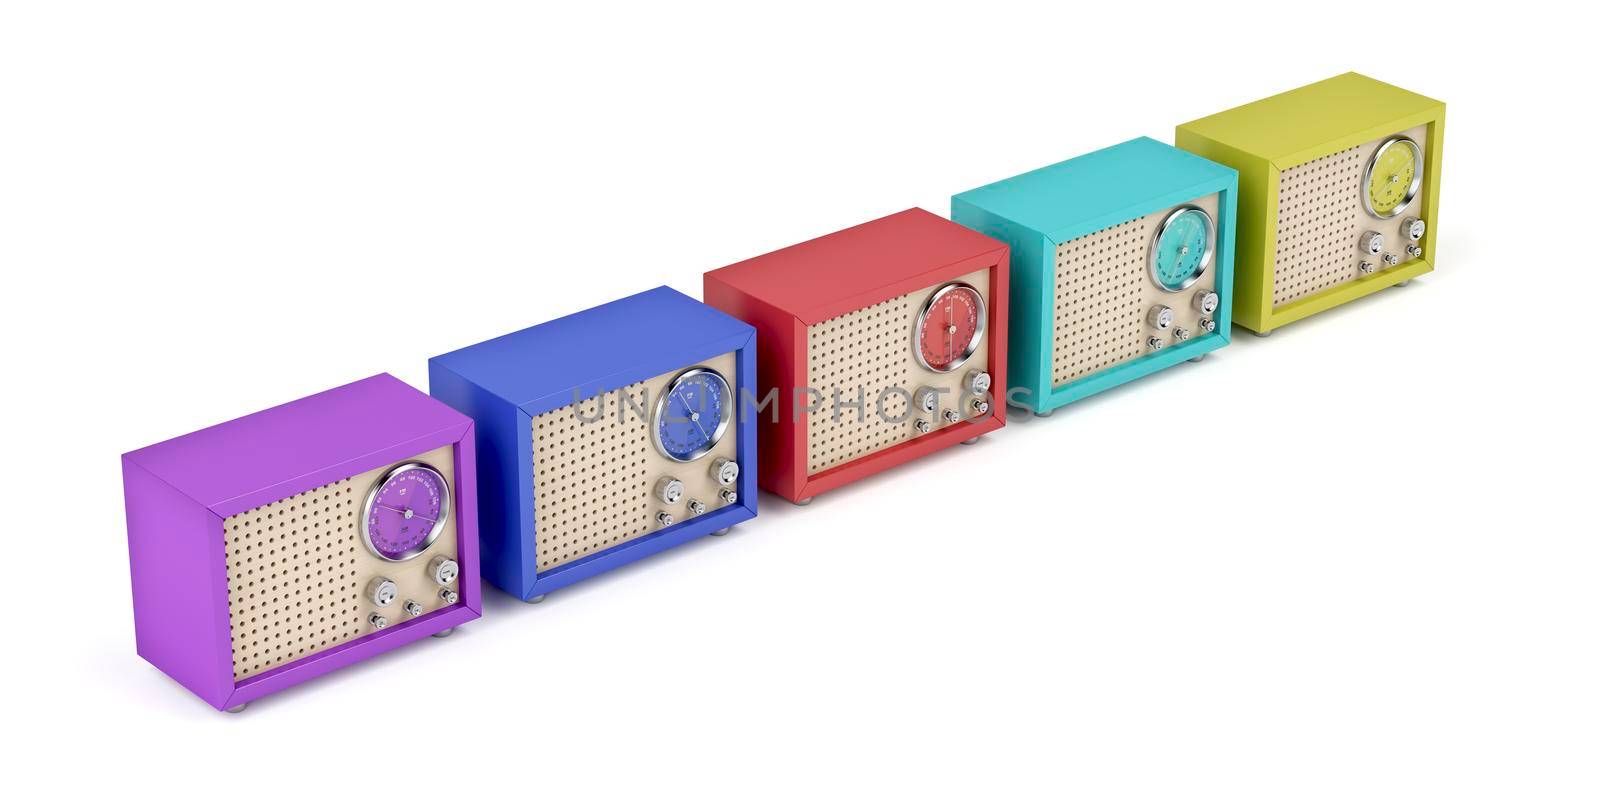 Retro radios with different colors by magraphics